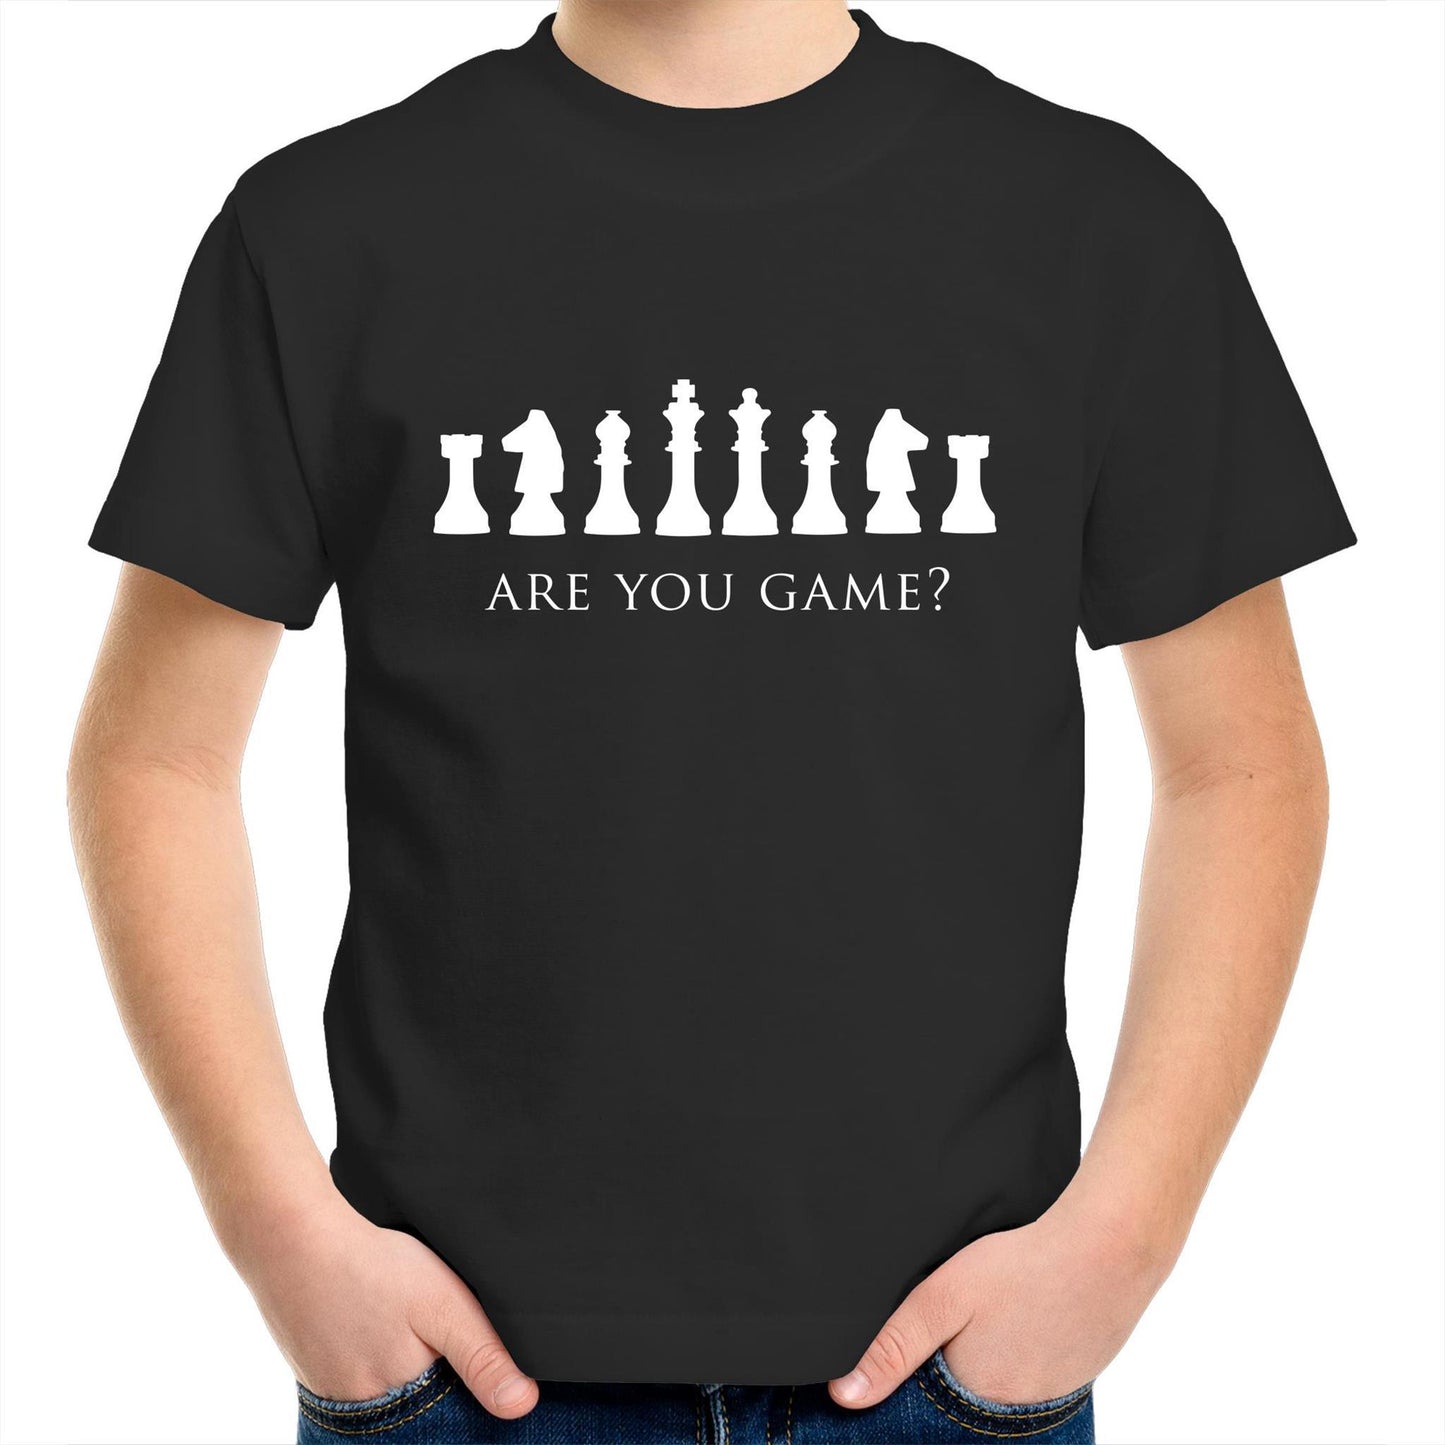 Are You Game - Kids Youth Crew T-shirt Black Kids Youth T-shirt Chess